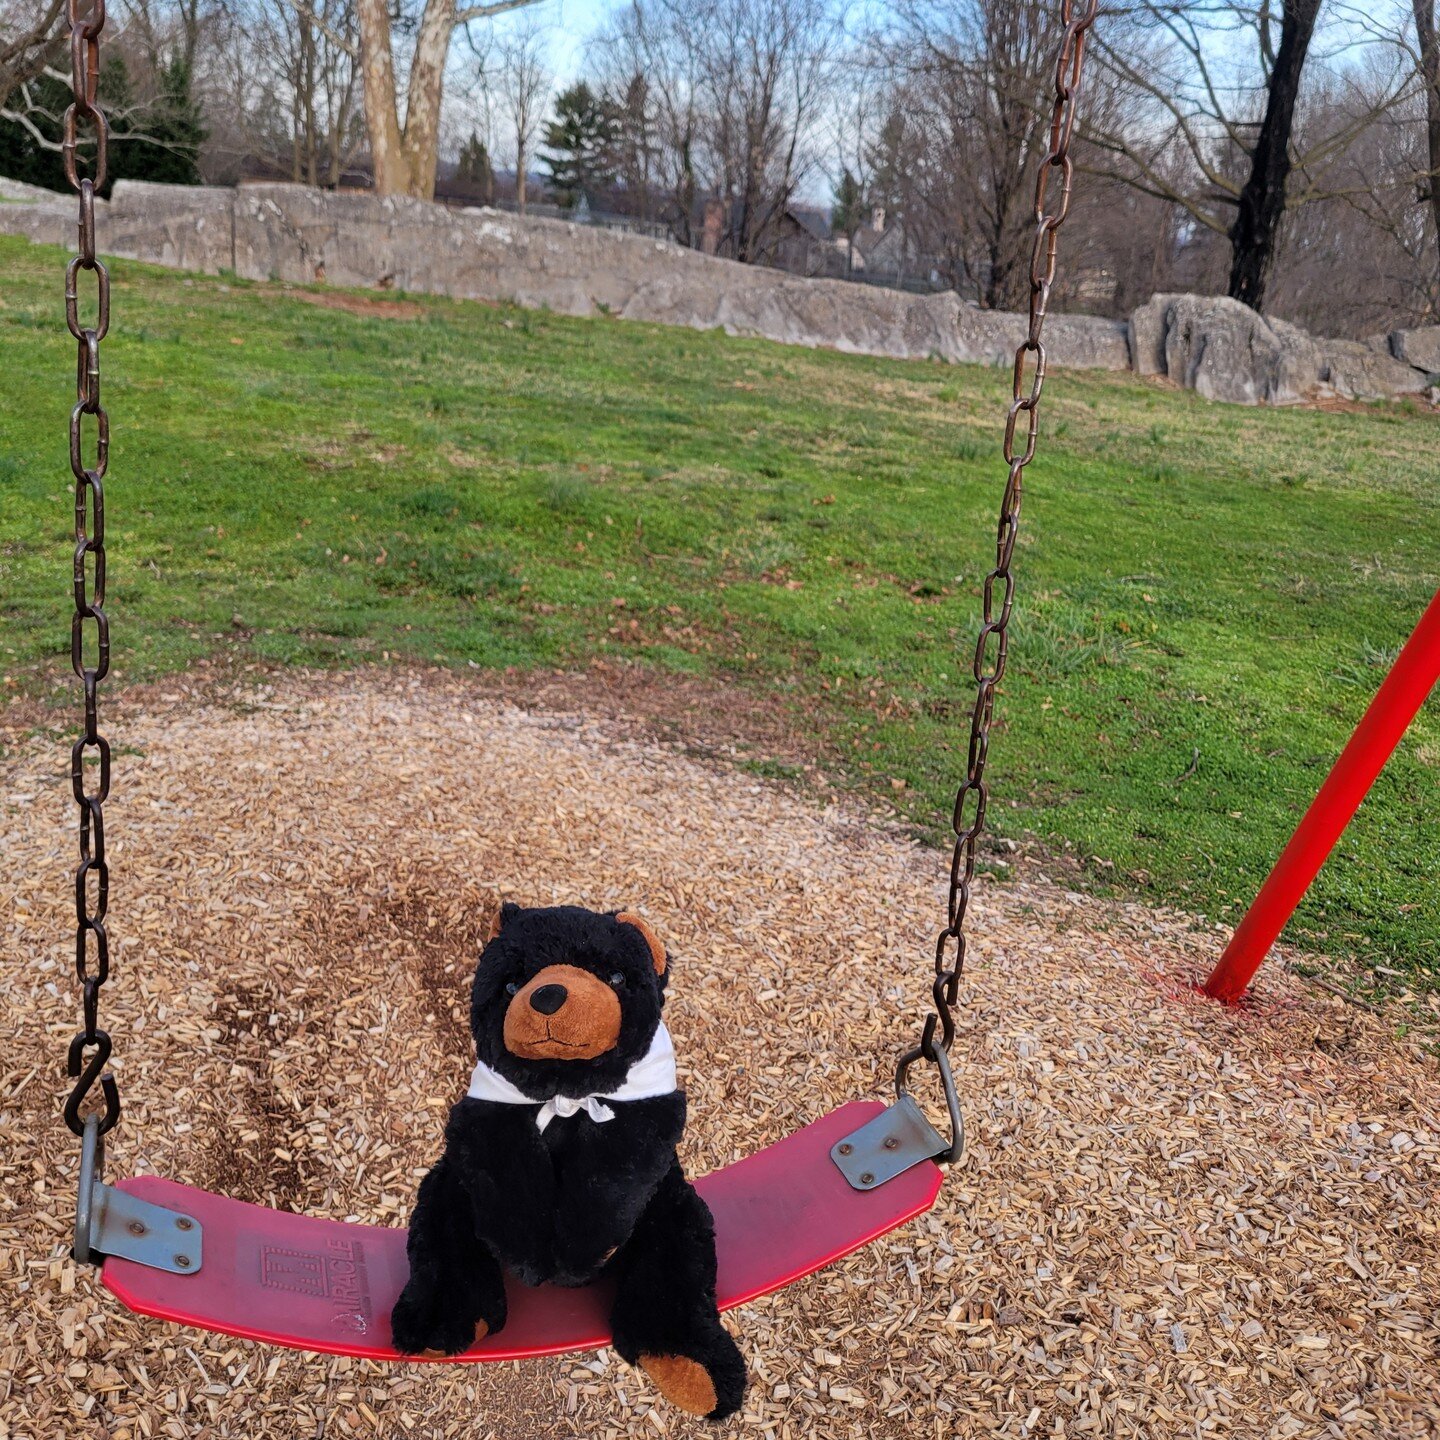 Today and tomorrow's weather is calling for you to get outdoors. Marti is ready to visit War Memorial Park to enjoy the weather. Make your plans now to visit Martinsburg-Berkeley County, WV. 

#travelplanner #getoutside #parksandrec #visitmartinsburg